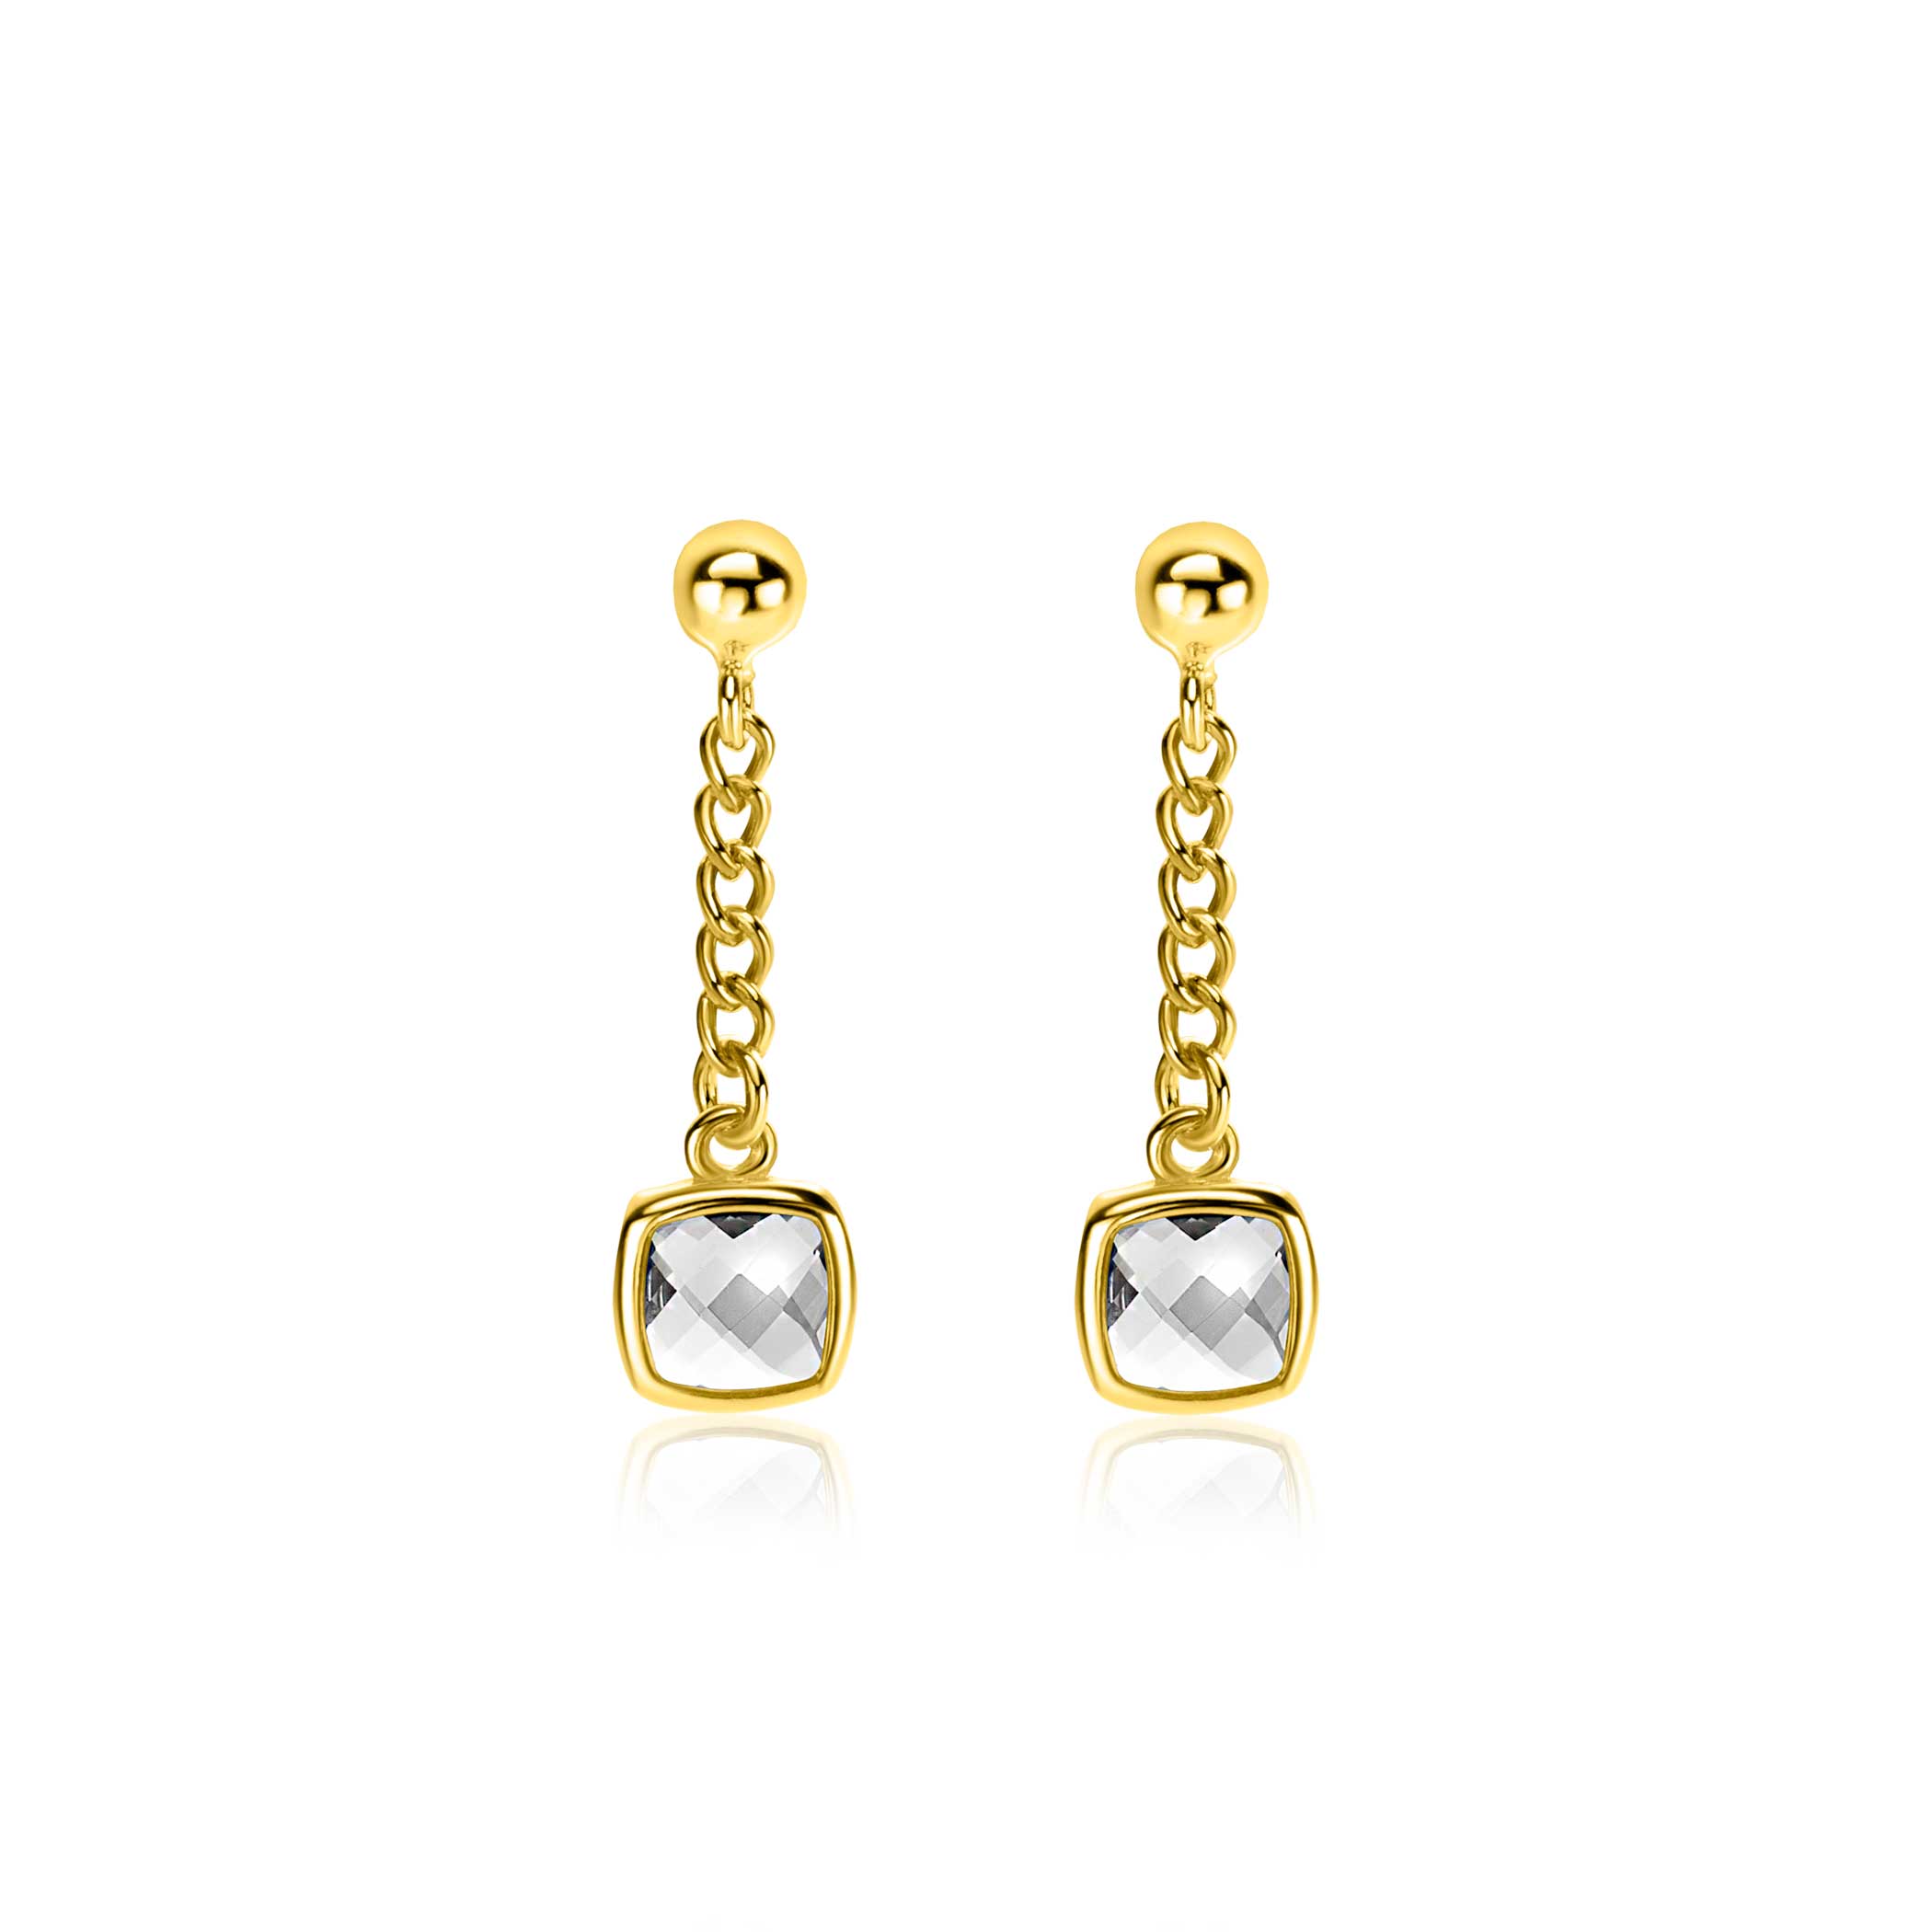 25mm ZINZI gold plated silver stud earrings with gourmet chain and square setting white zirconia ZIO2417Y
